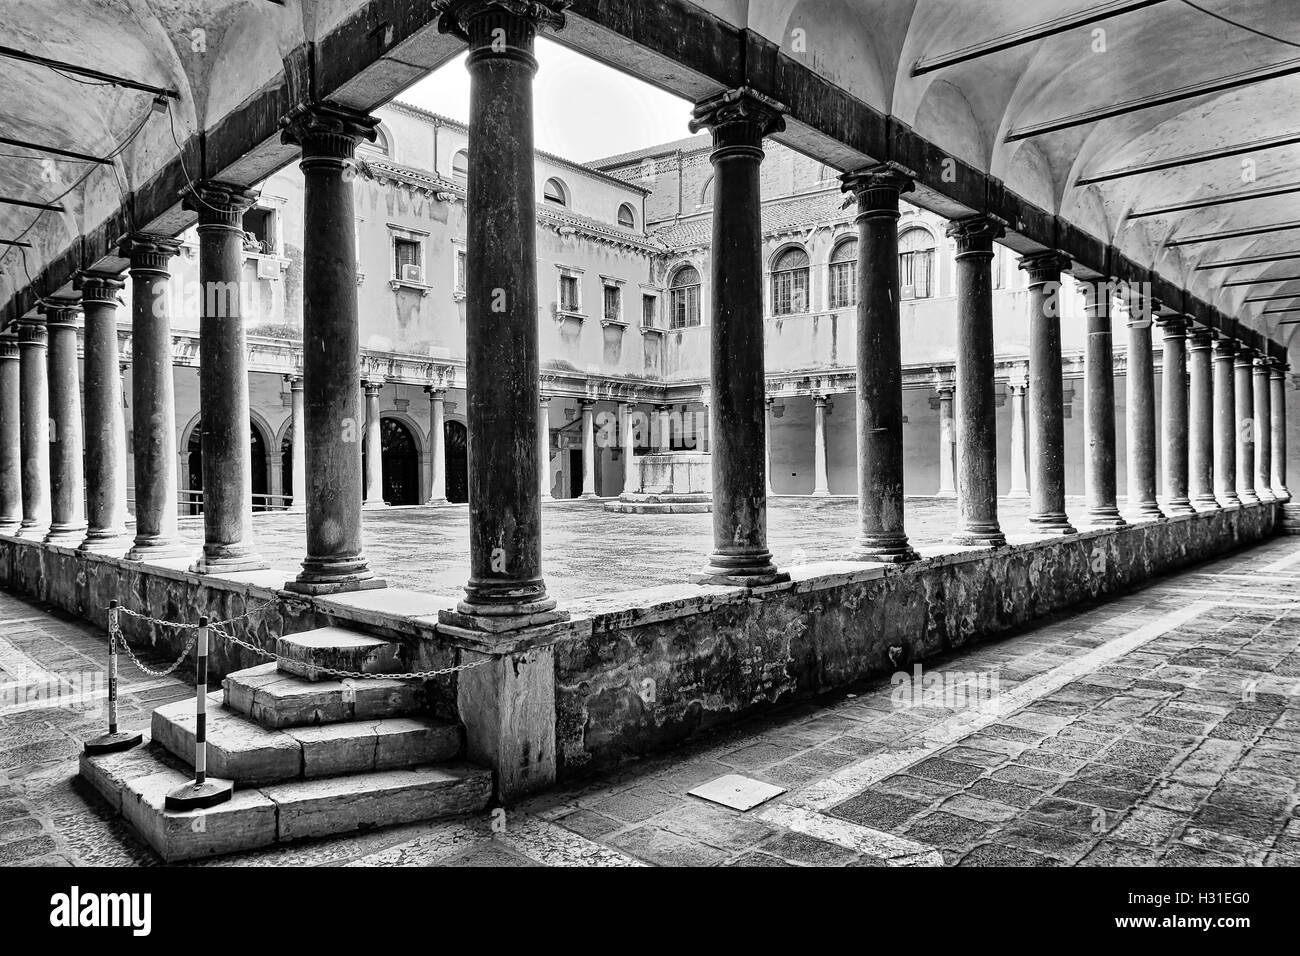 Inner courtyard of historic wealthy italian palaces - Doge's palace in Venice city of ancient republic. Empty space surrounded Stock Photo